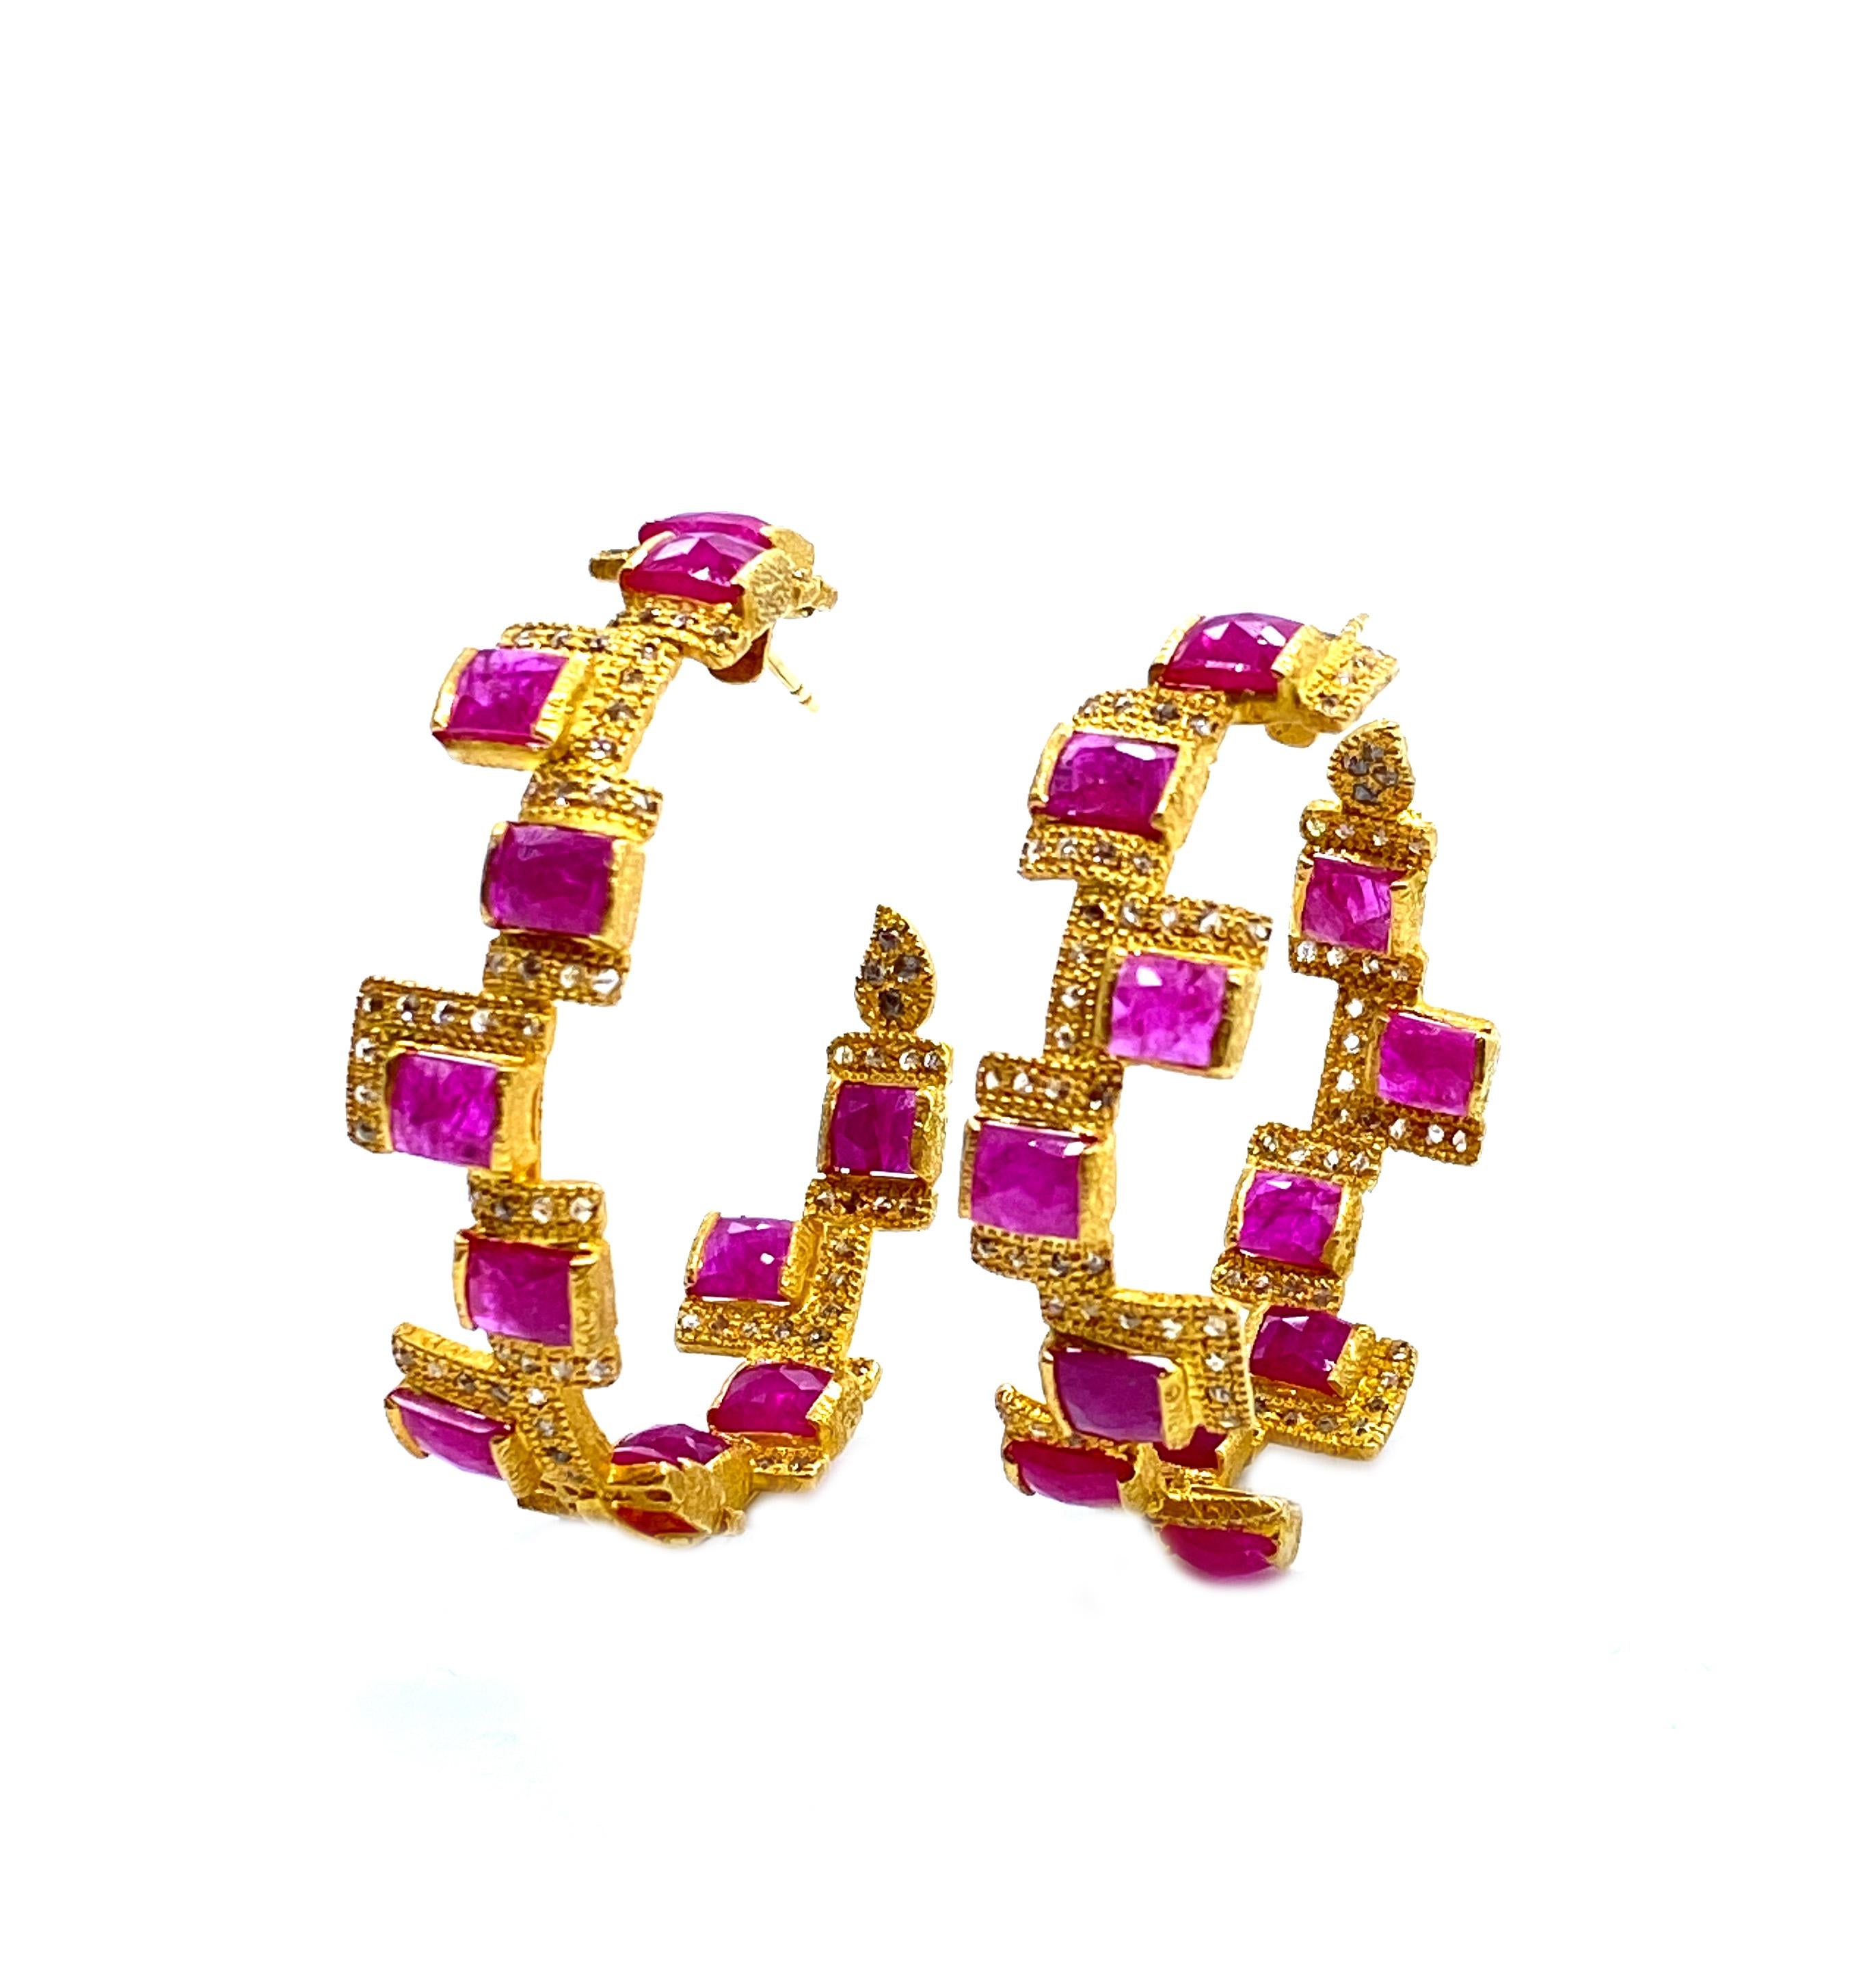 A stunning pair of Hoop earrings set in a rich 20 Karat Yellow Gold with an approximate 15.3cts Ruby weight and 1.84cts rose-cut diamonds surrounding the rubies. Inspired by Art Deco and Mosaic from Coomi's Affinity collection which represents a